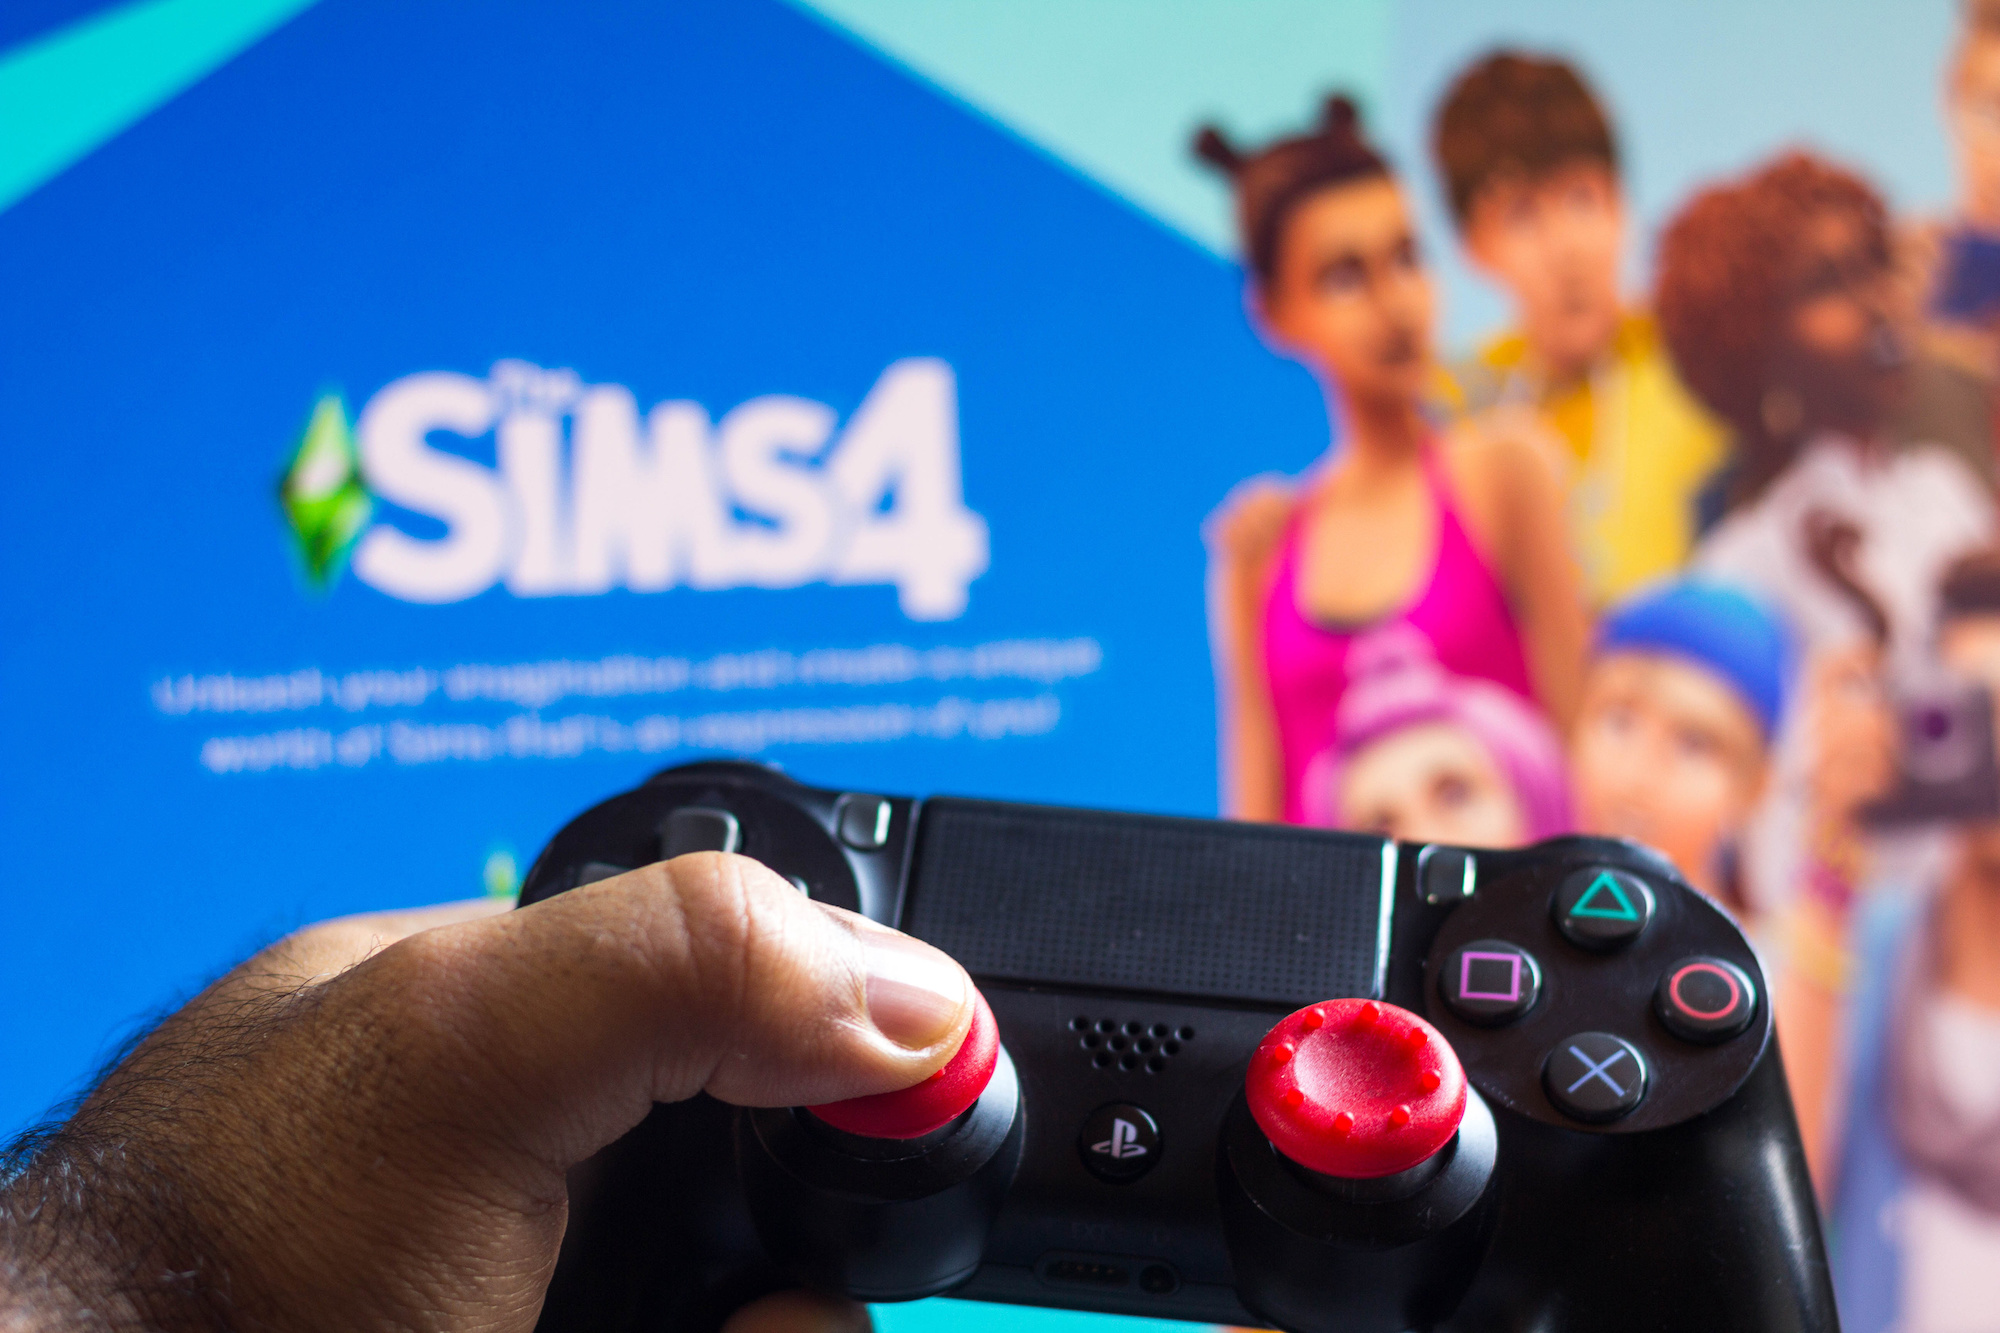 PlayStation (PS) controller and The Sims 4 game logo seen in he background